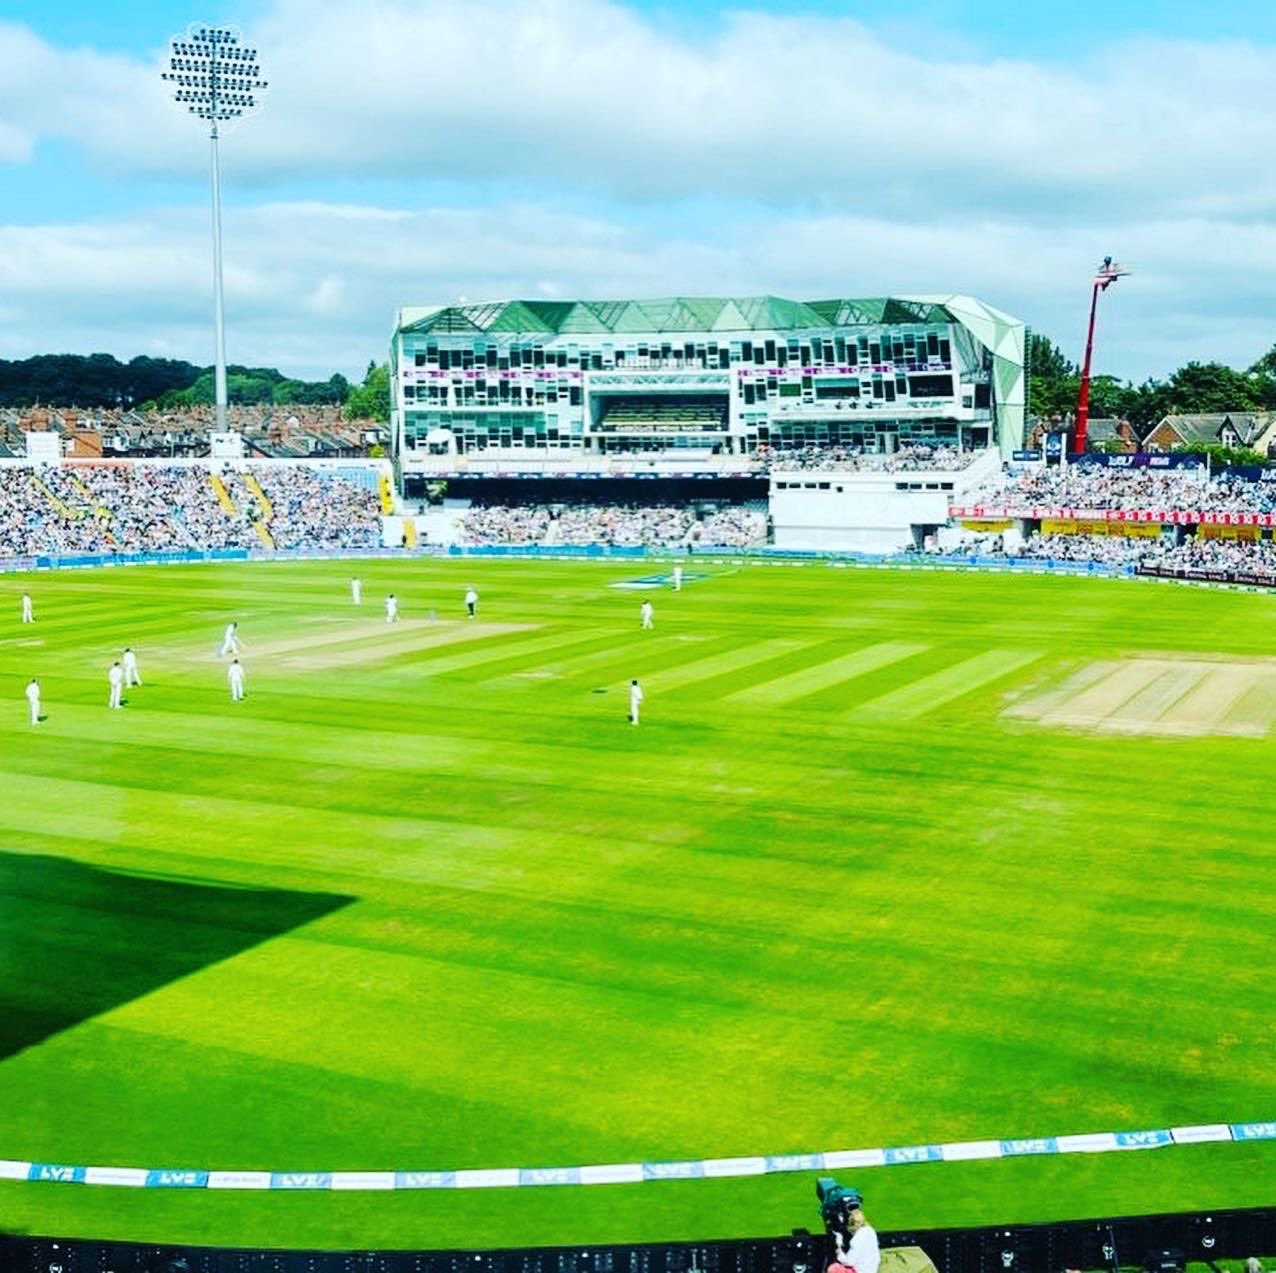  Oval, Headingley, Old Trafford Among Venues For India's Next Two Test Tours Of E-TeluguStop.com